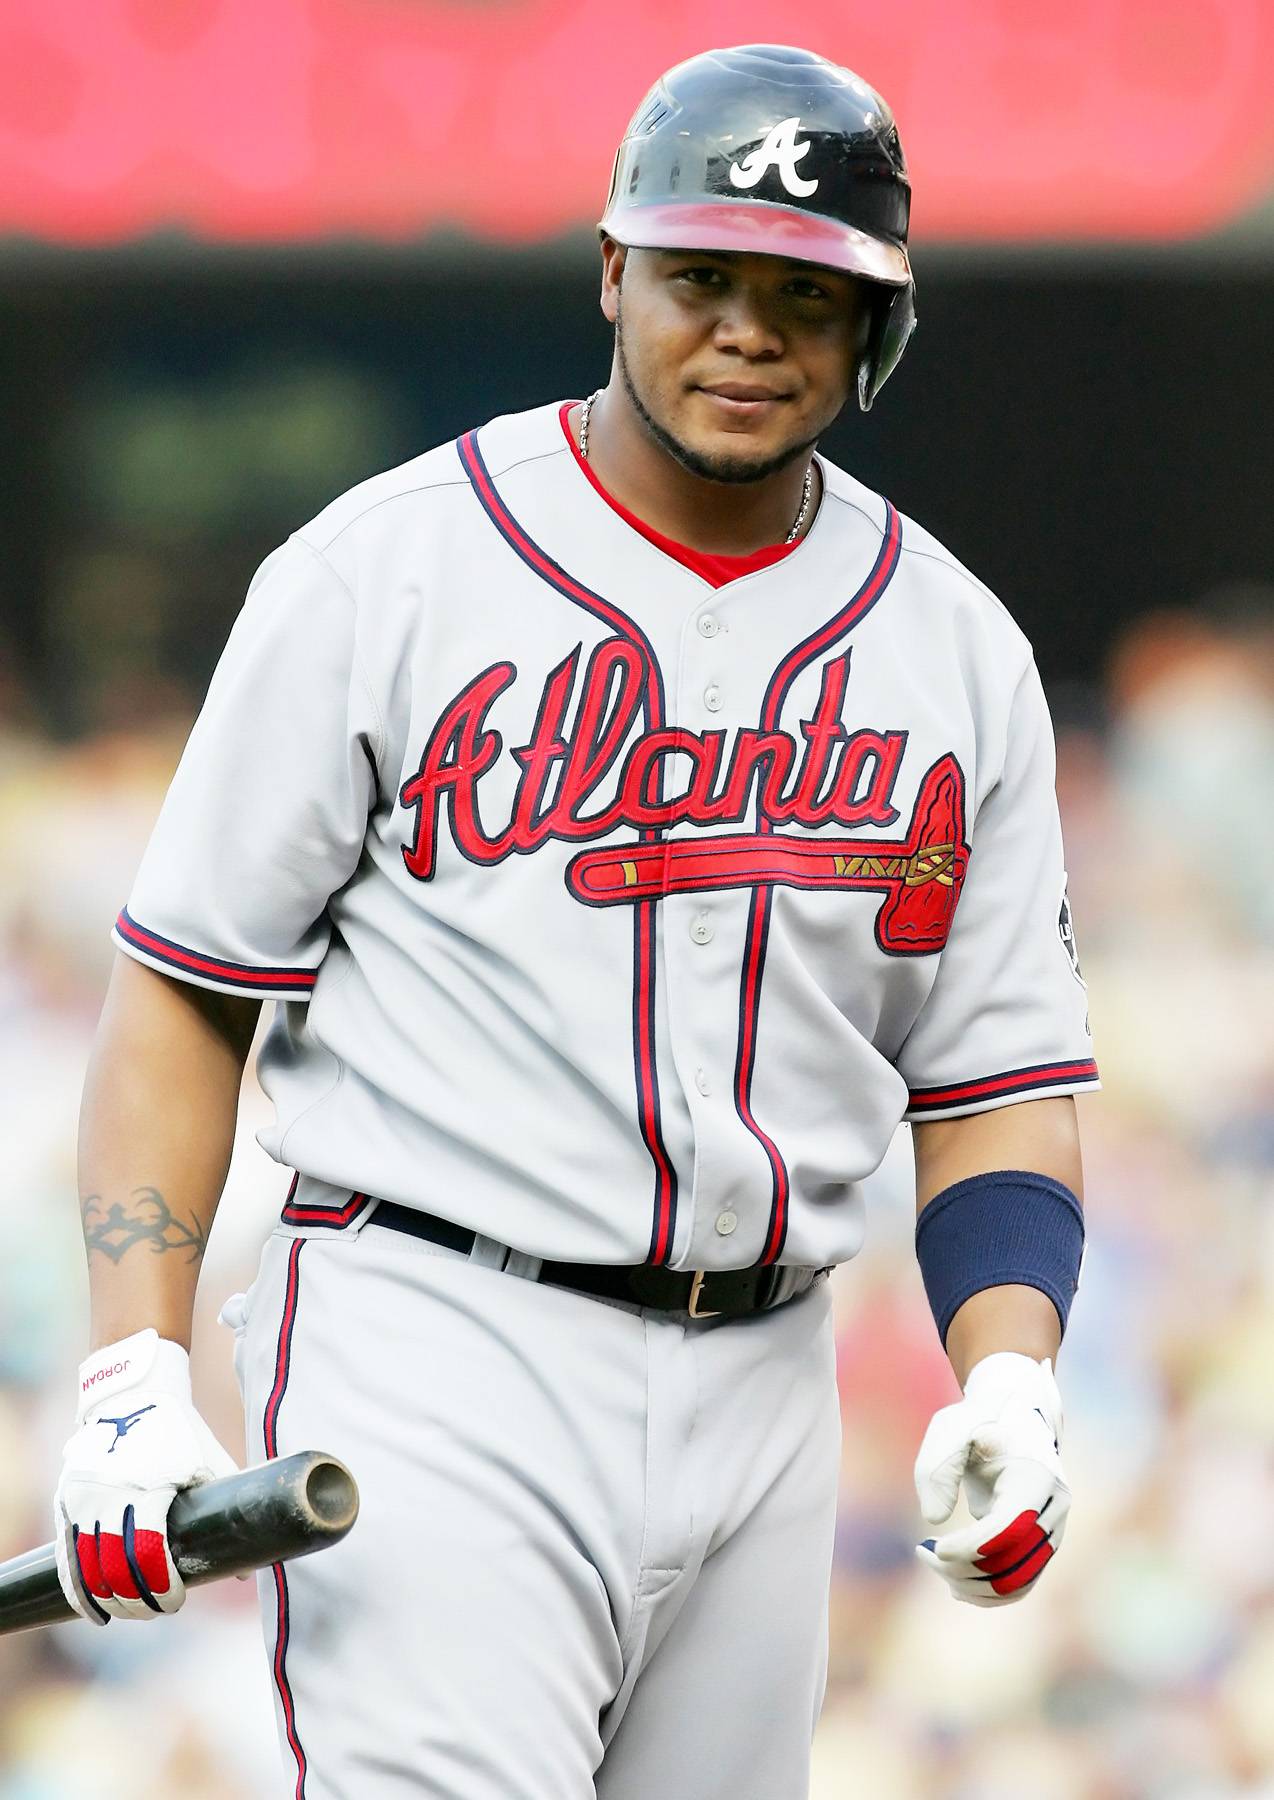 Andruw Jones of the Atlanta Braves prepares to bat during the game